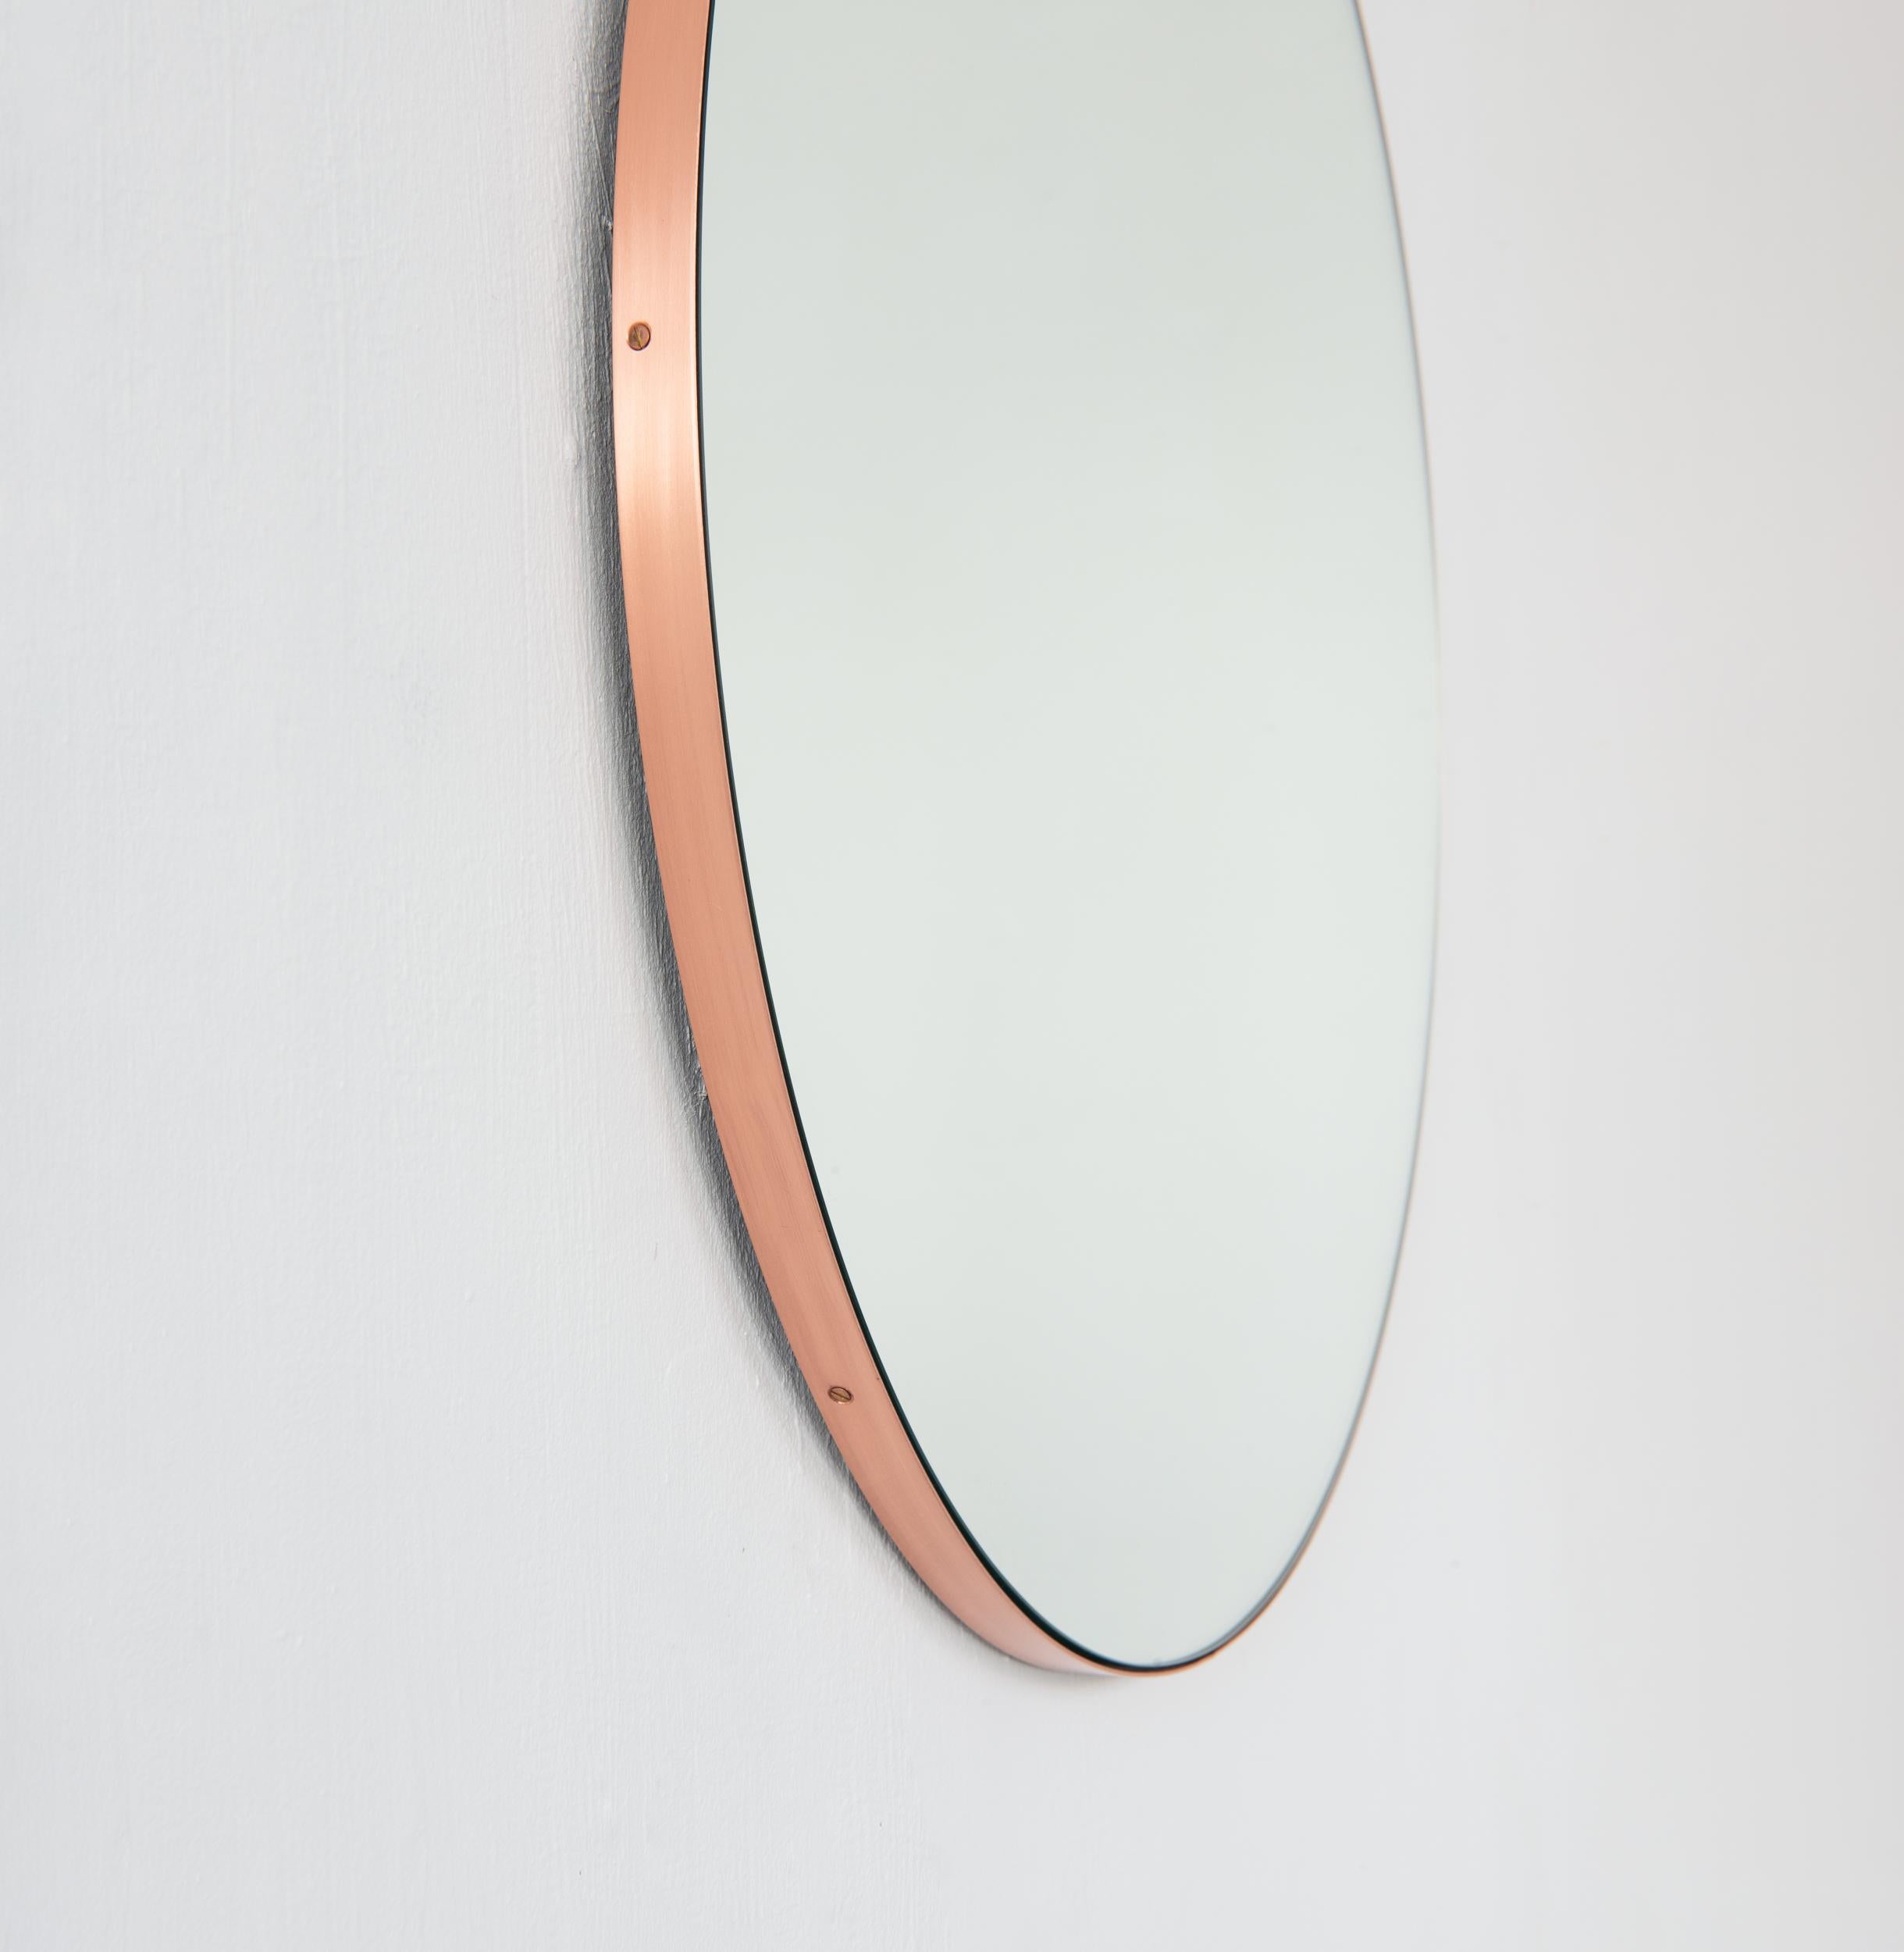 British Orbis Round Modern Mirror with Copper Frame, Small For Sale